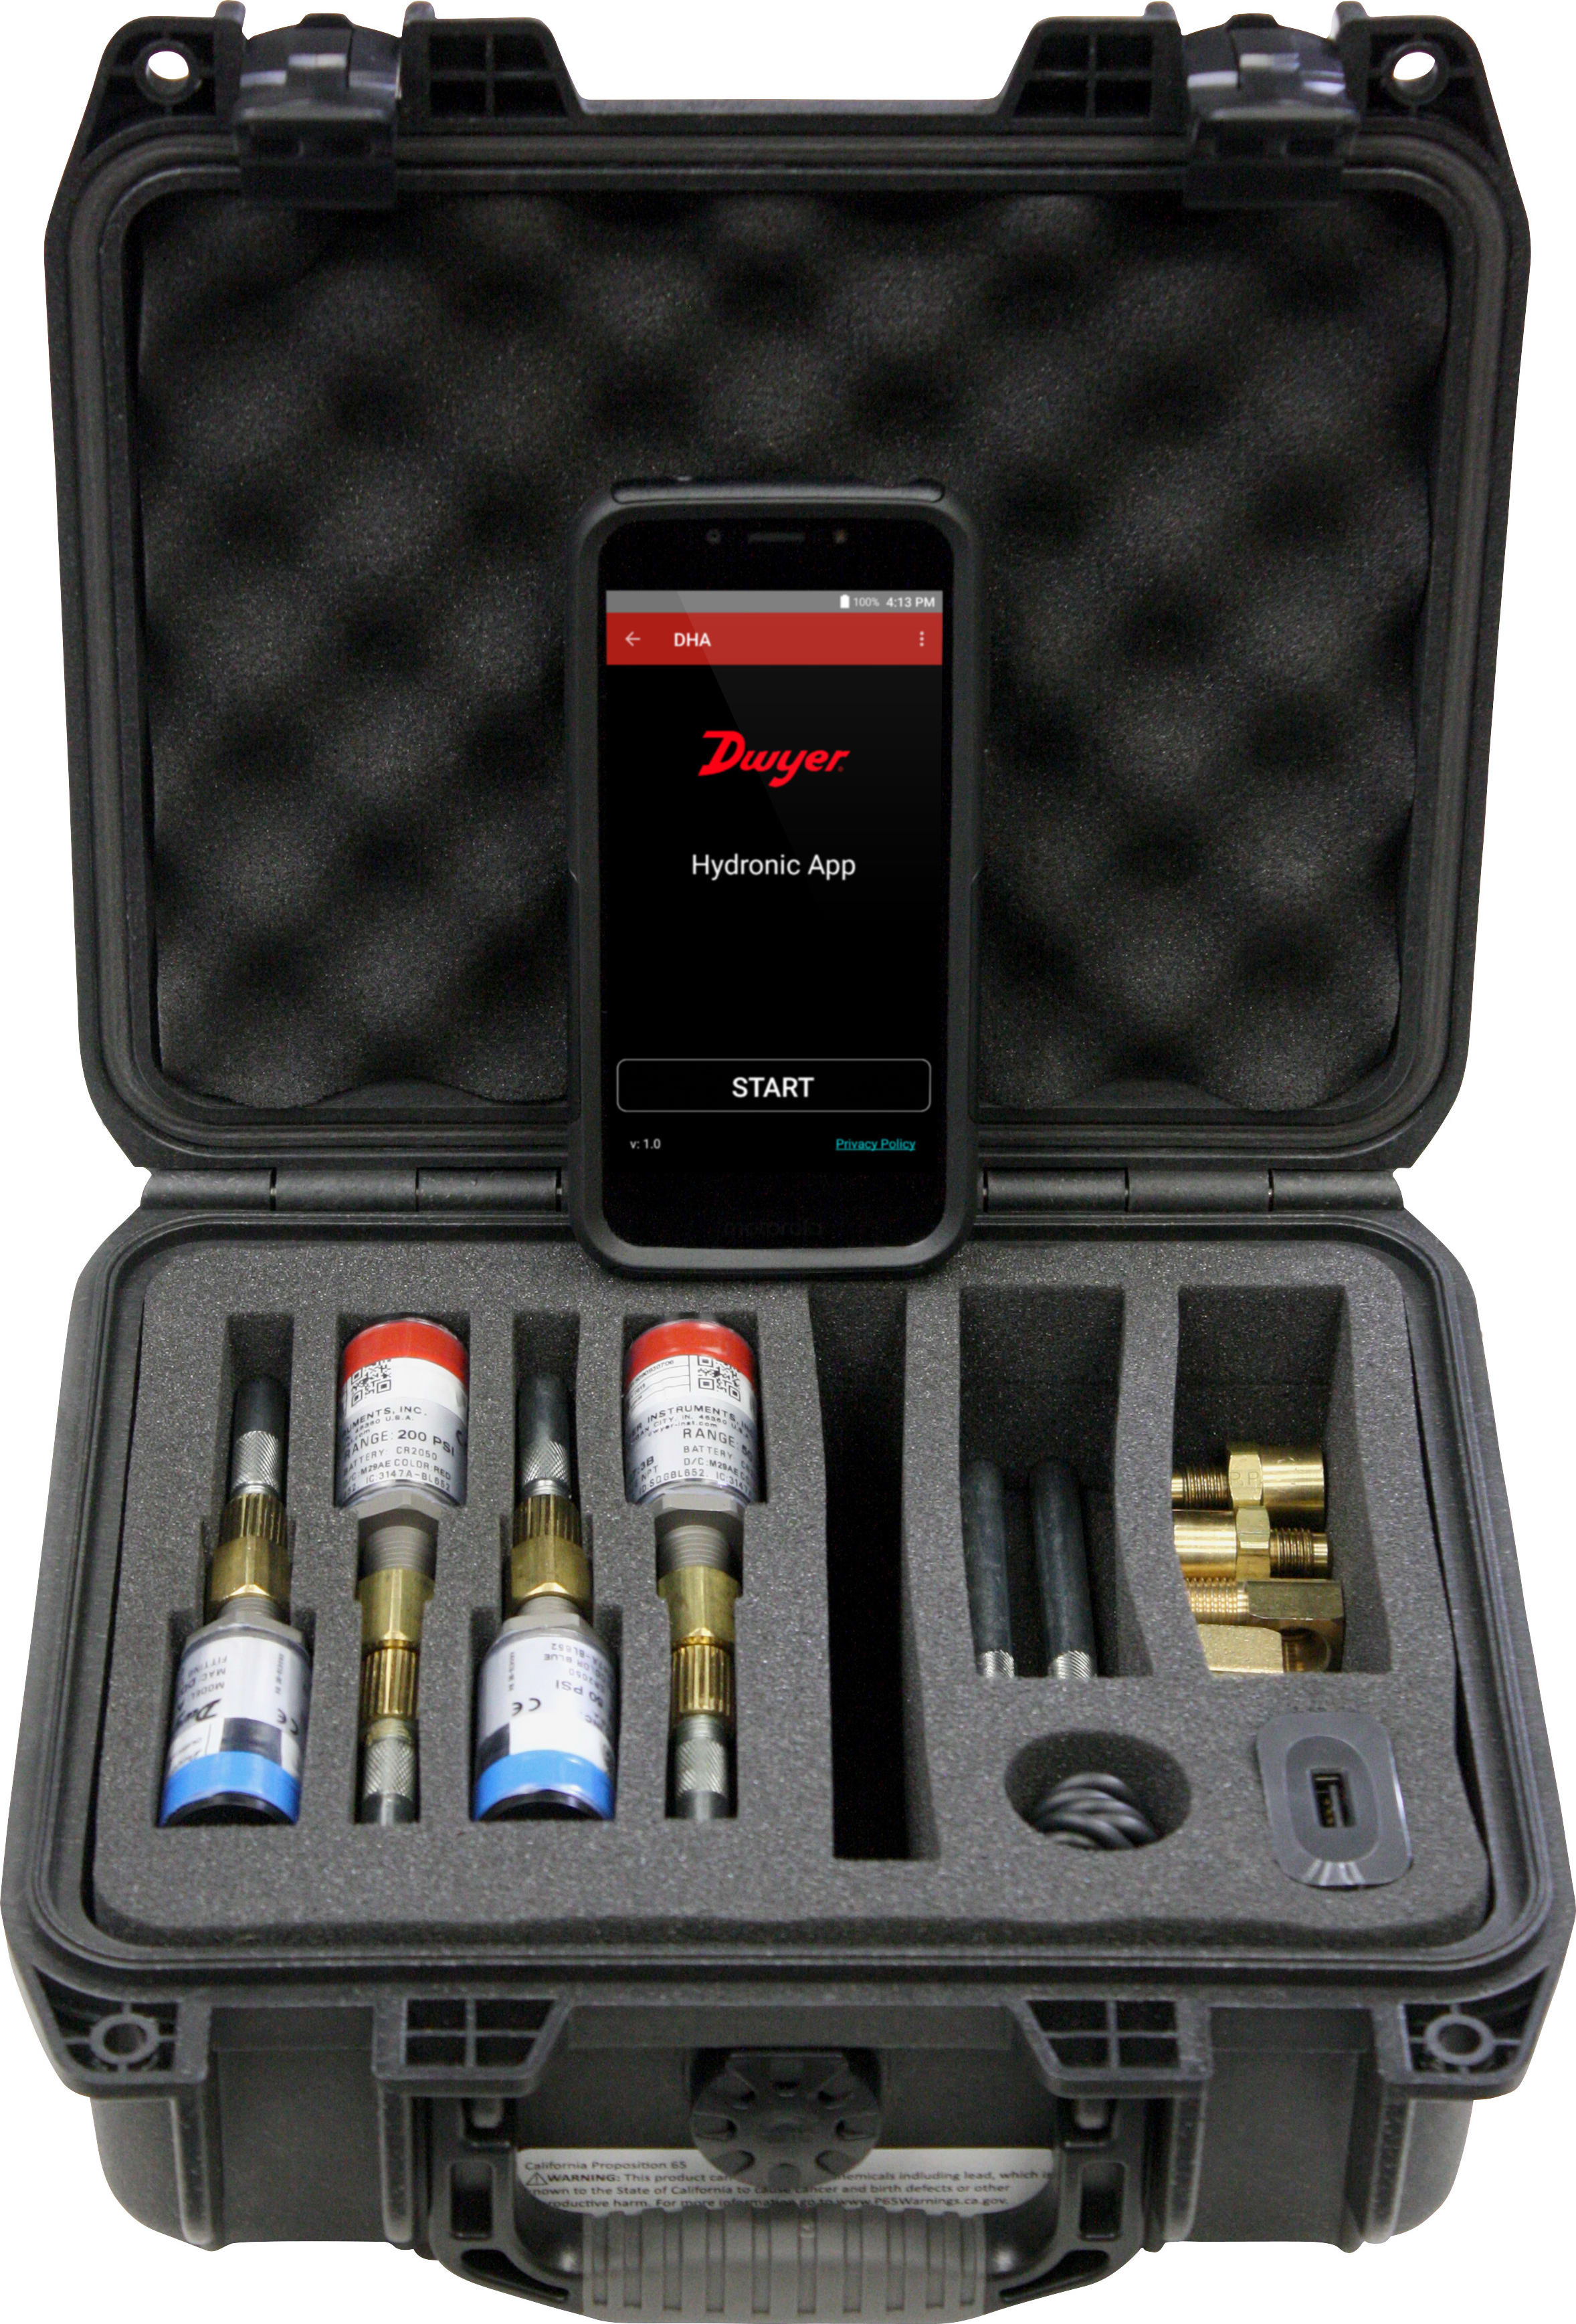 Dwyer 490W Hydronic Differential Pressure Manometer Kit